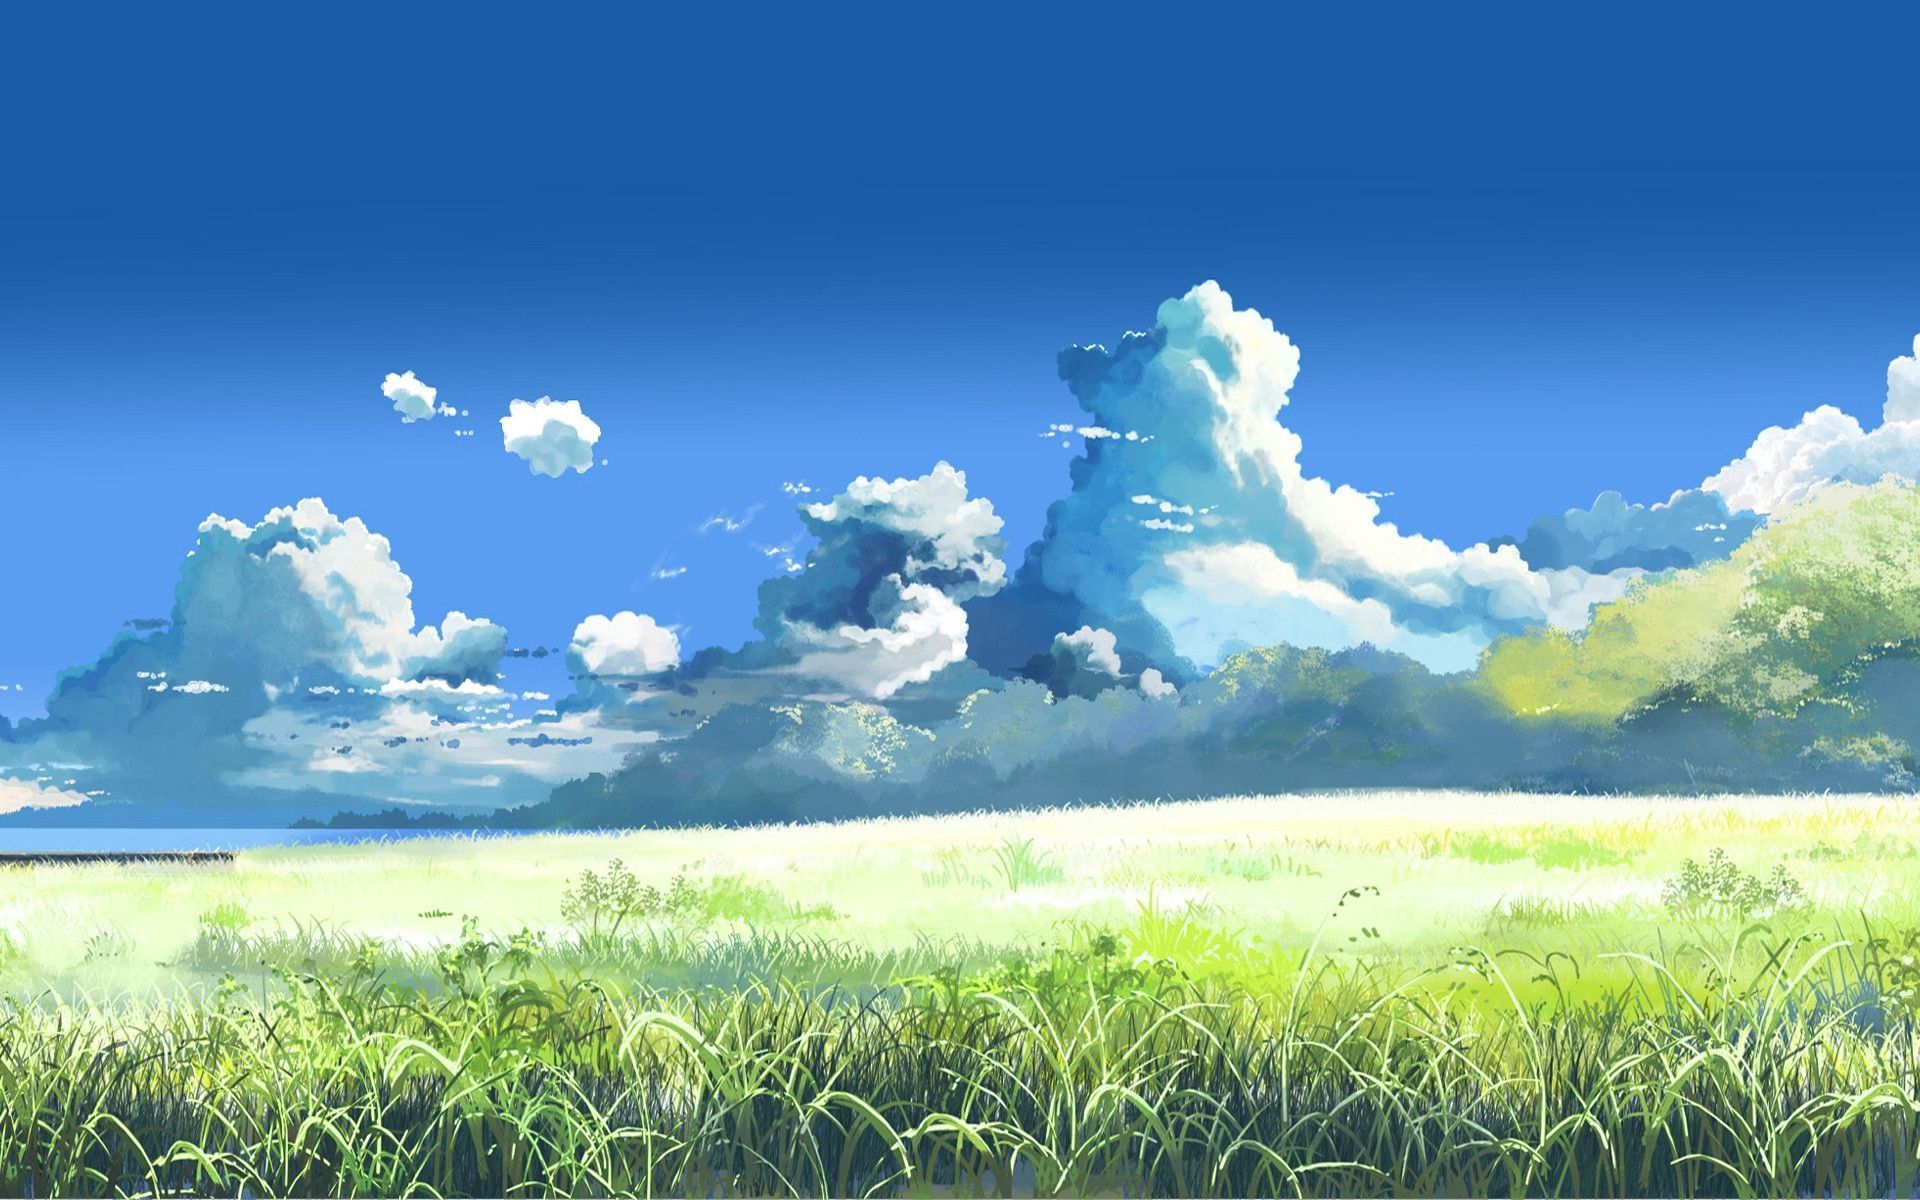 Download Enjoy a peaceful nature view with this cute animestyle landscape  Wallpaper  Wallpaperscom